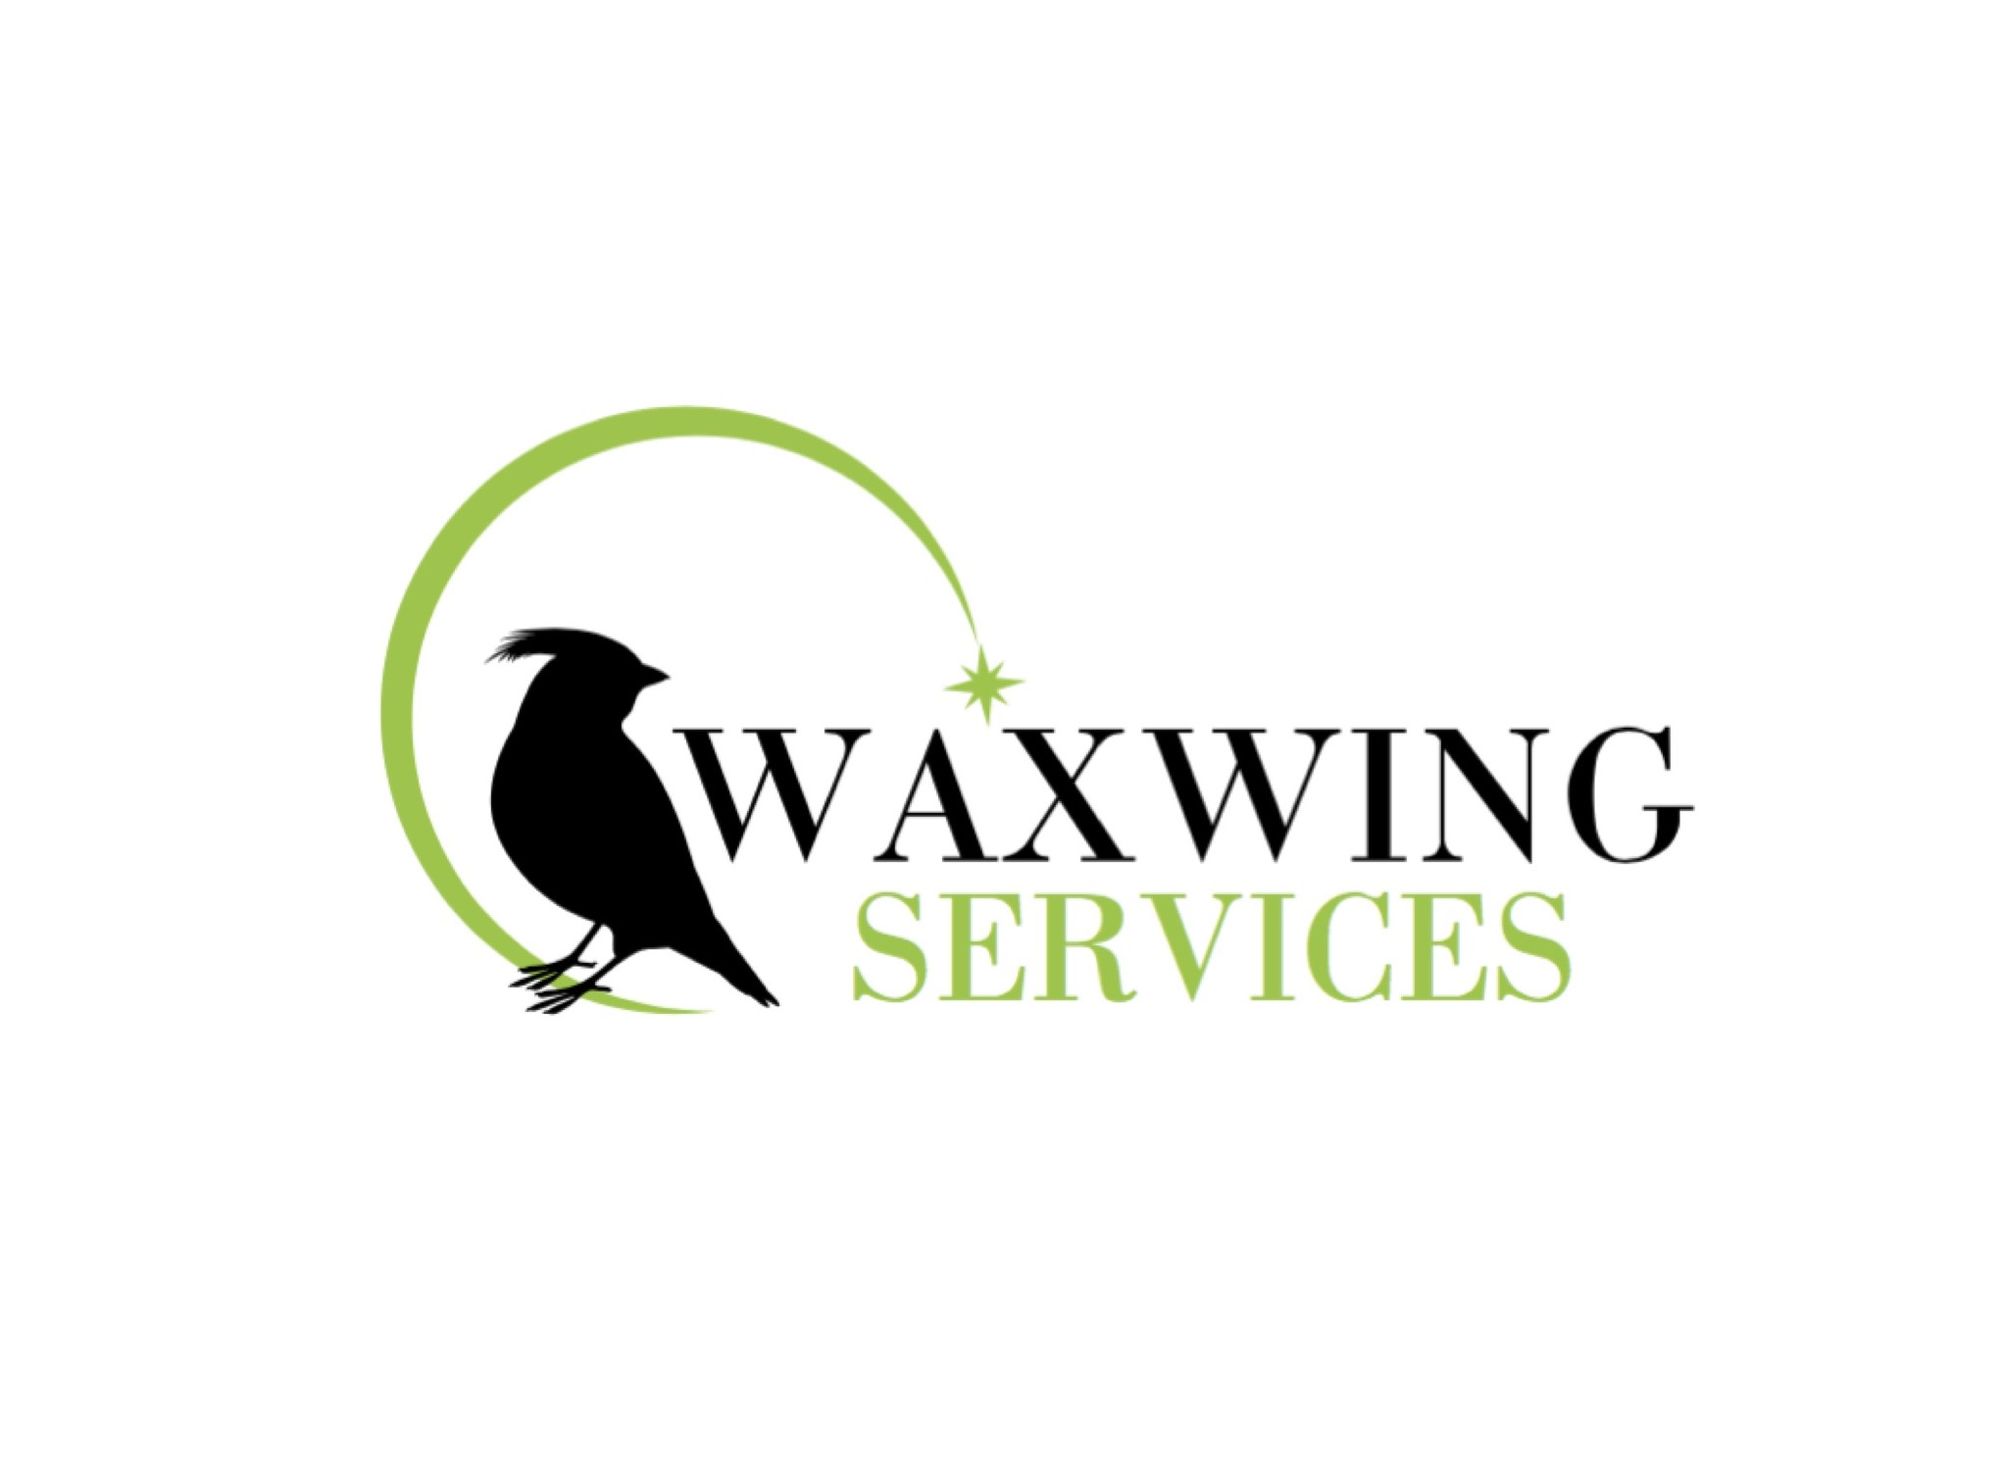 Cleaning One Place at a Time - Waxwing Services